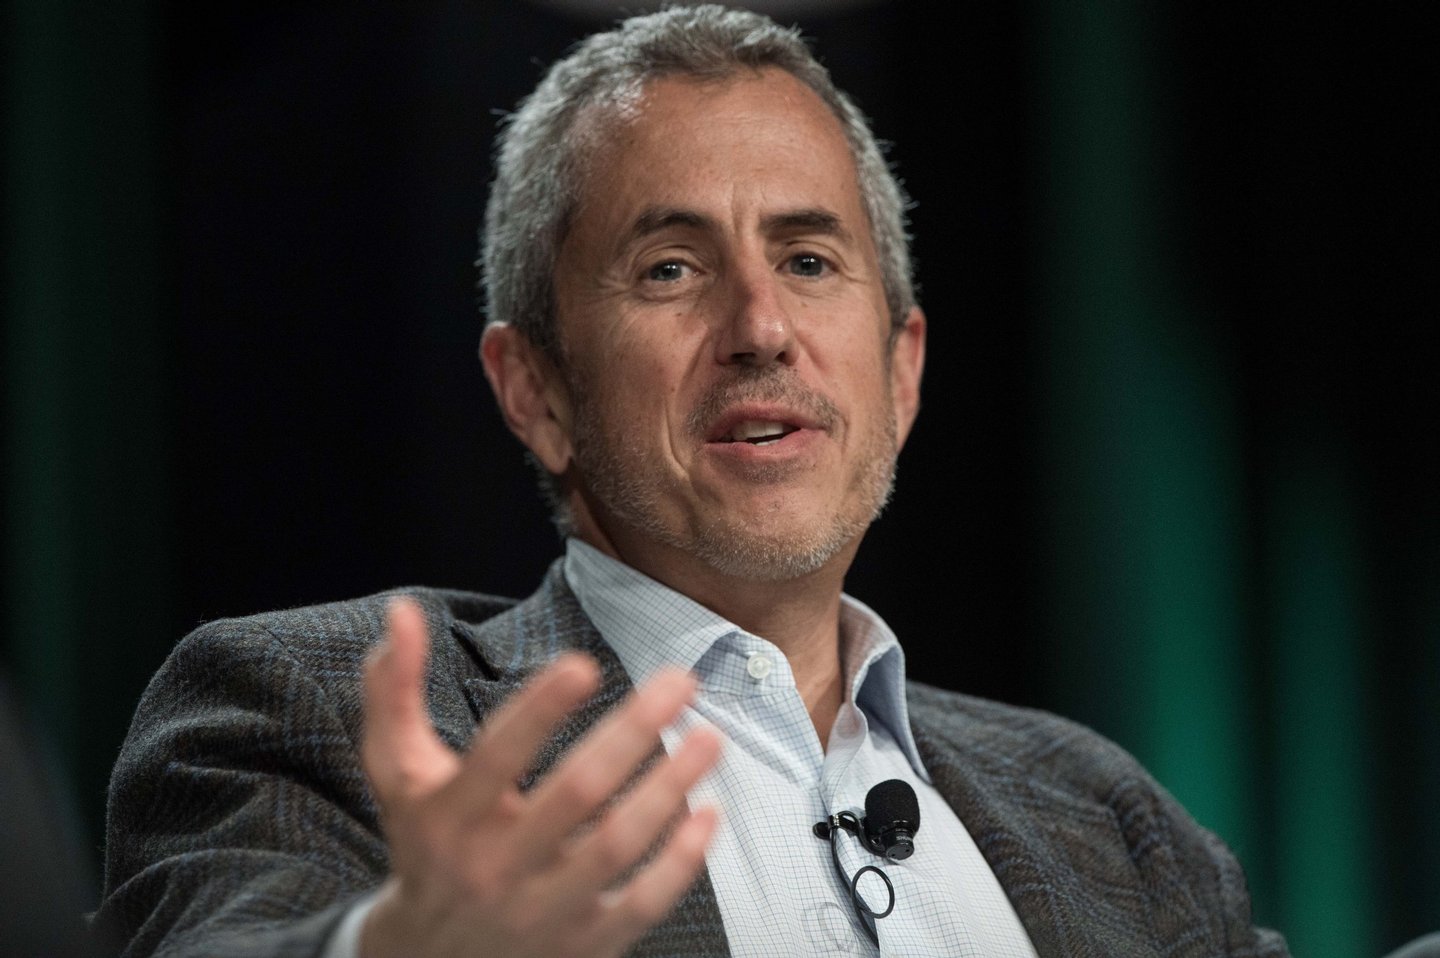 Danny Meyer, chief founder of the Union Square Hospitality Group and Shake Shack, speaks at the Forbes Under 30 Summit in Philadelphia,PA on October 21, 2014. AFP PHOTO/Nicholas KAMM (Photo credit should read NICHOLAS KAMM/AFP/Getty Images)